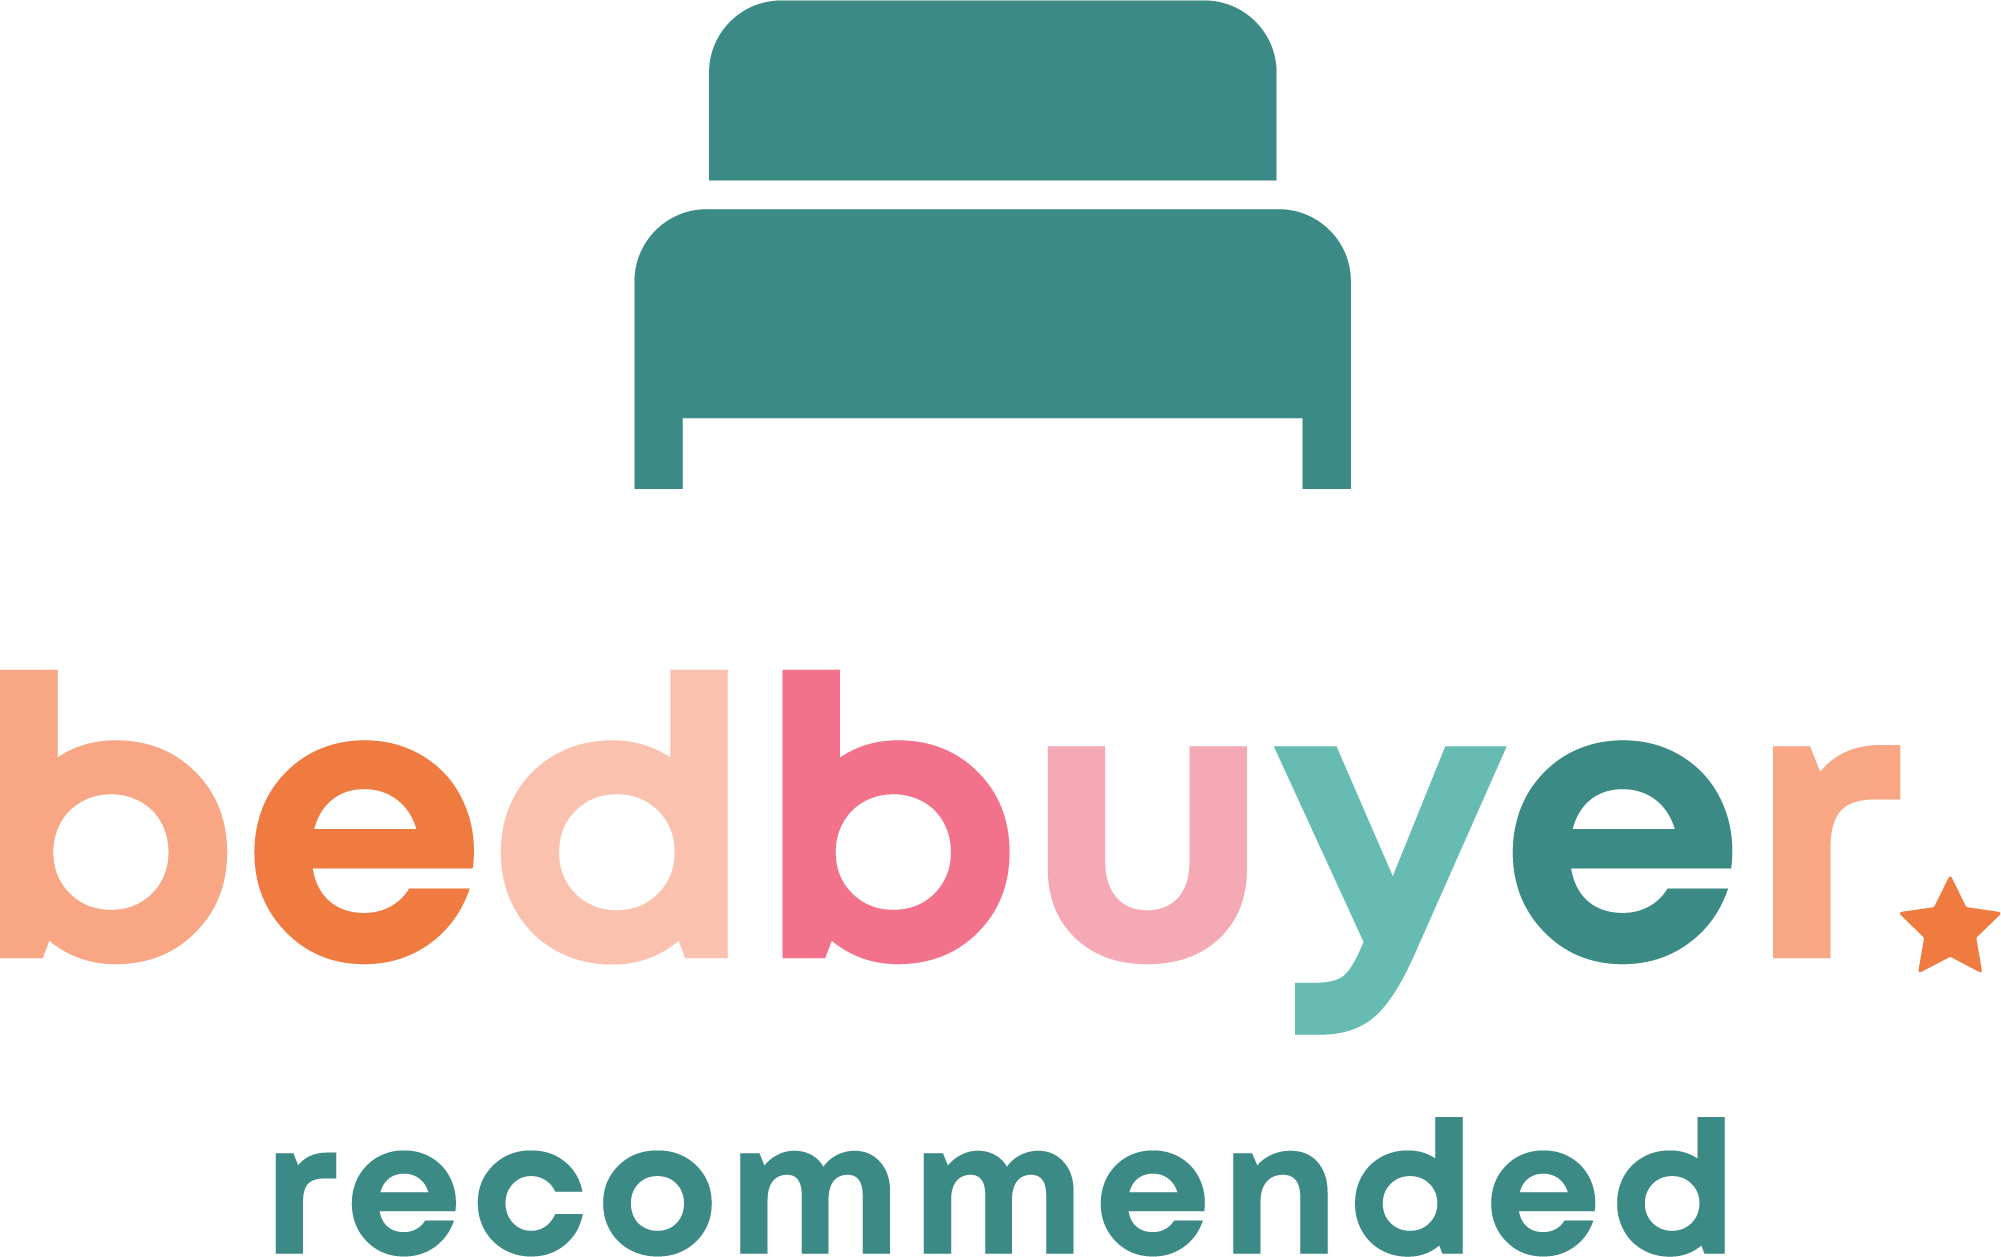 Bedbuyer recommended.